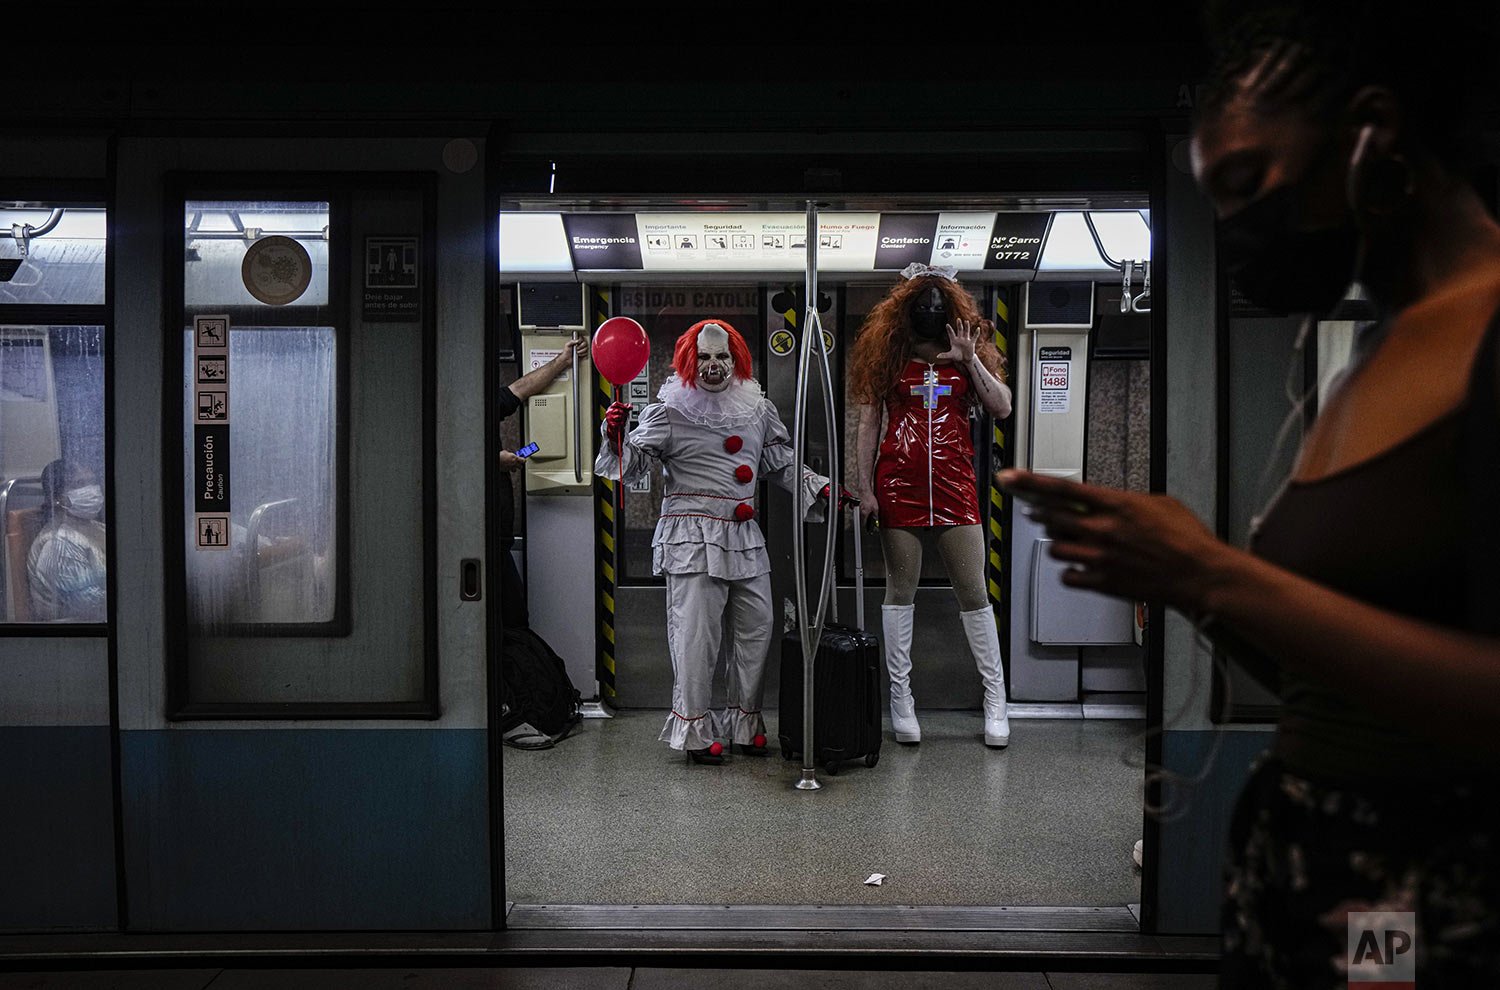  People in Halloween costumes travel on the subway in Santiago, Chile, Oct. 31, 2021. (AP Photo/Esteban Felix) 